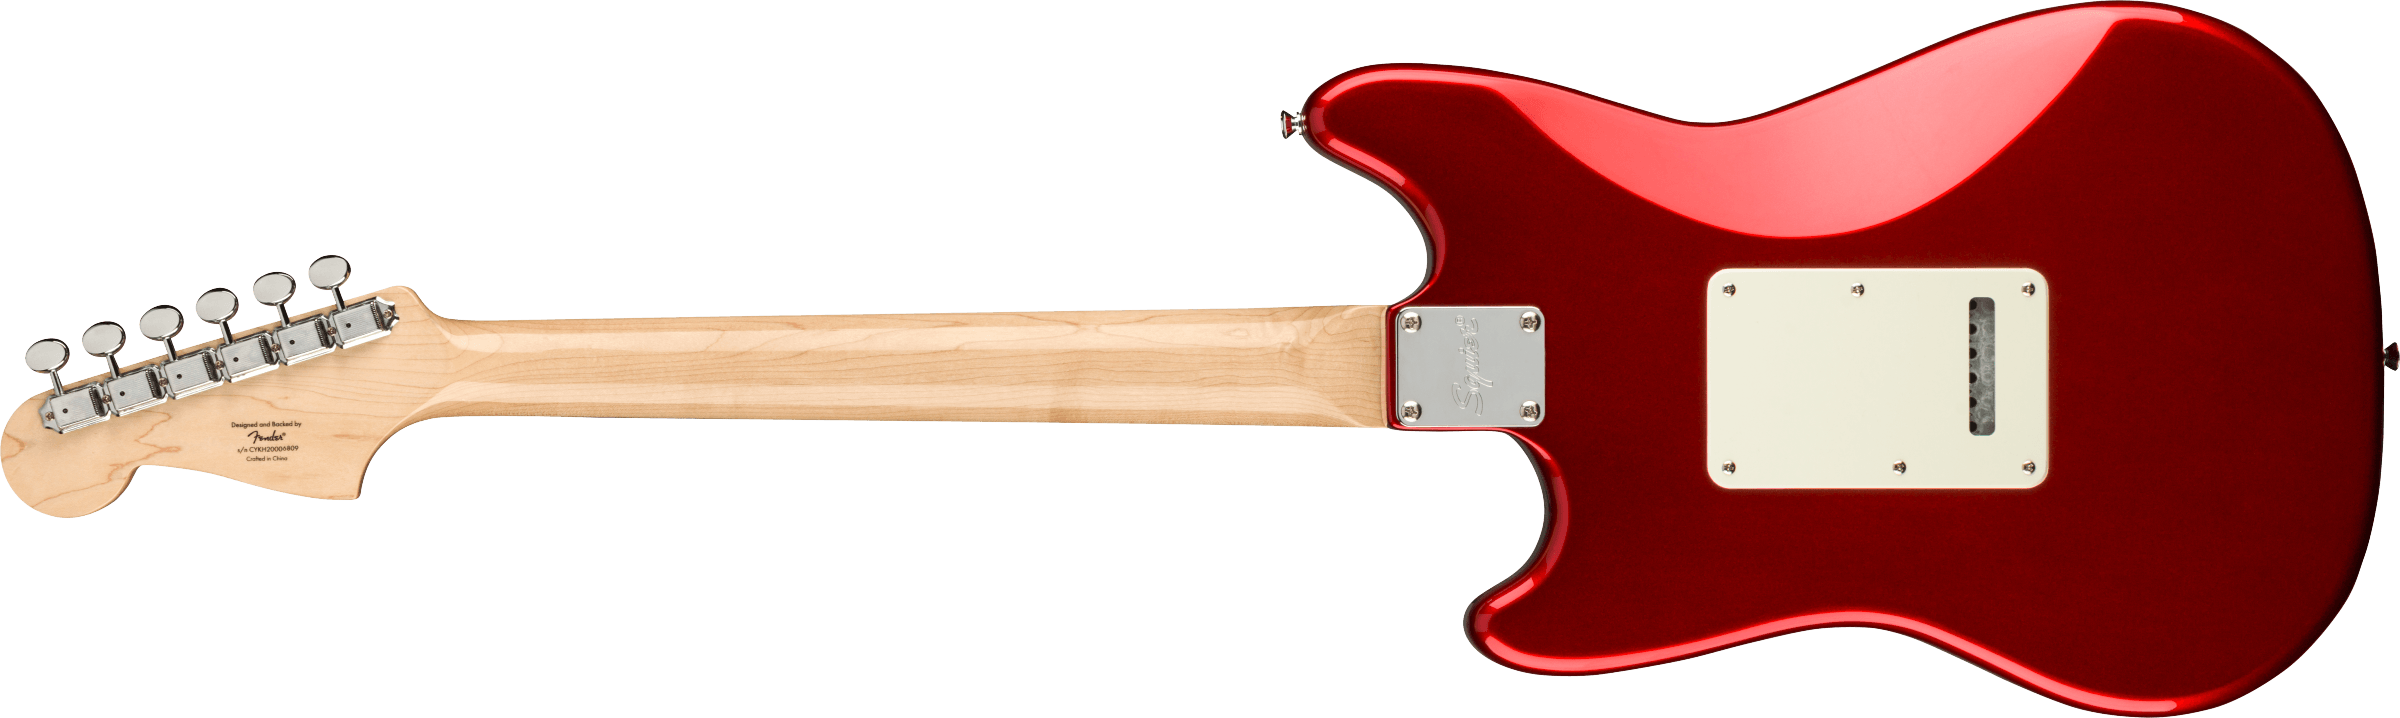 Squier Paranormal Cyclone Pearloid Pickguard, Candy Apple Red F-0377010509